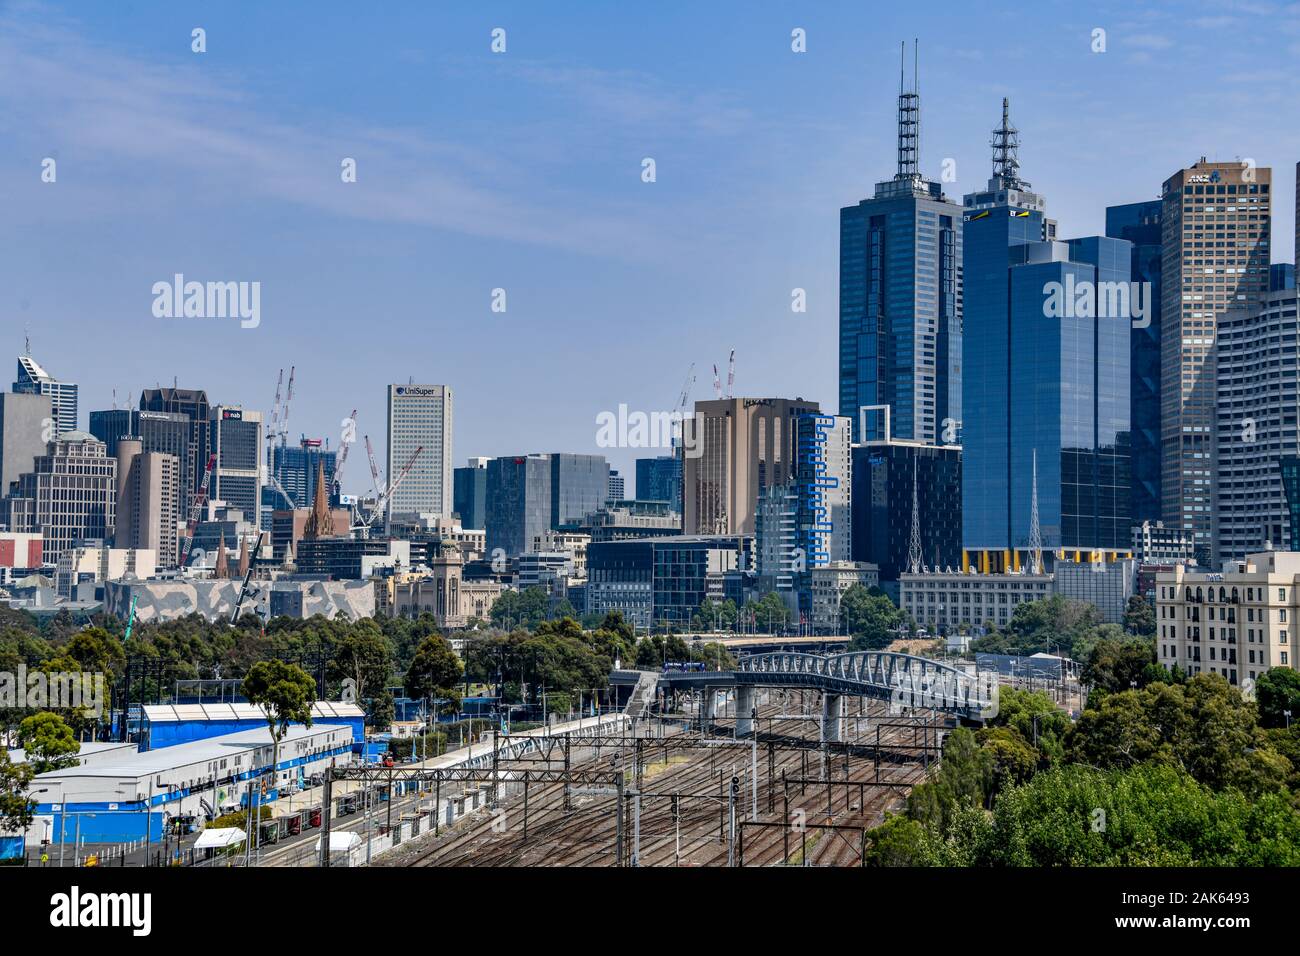 Melbourne cityscape skyline looking from the MCG - Melbourne Cricket Ground across Olympic Park and rail yards Stock Photo